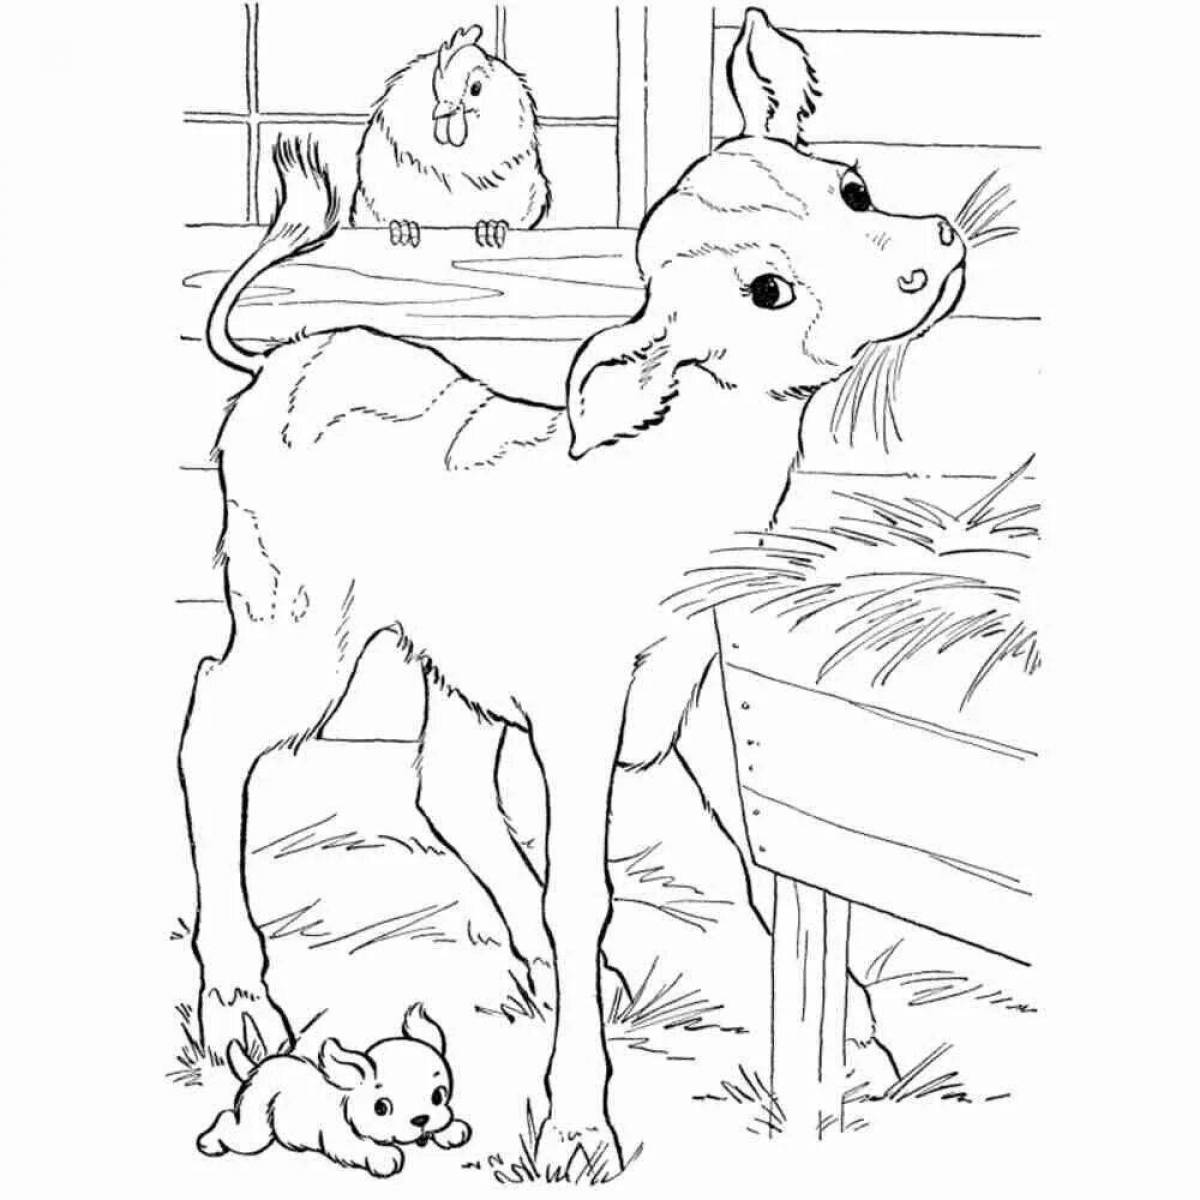 Fun coloring book for pets for kids